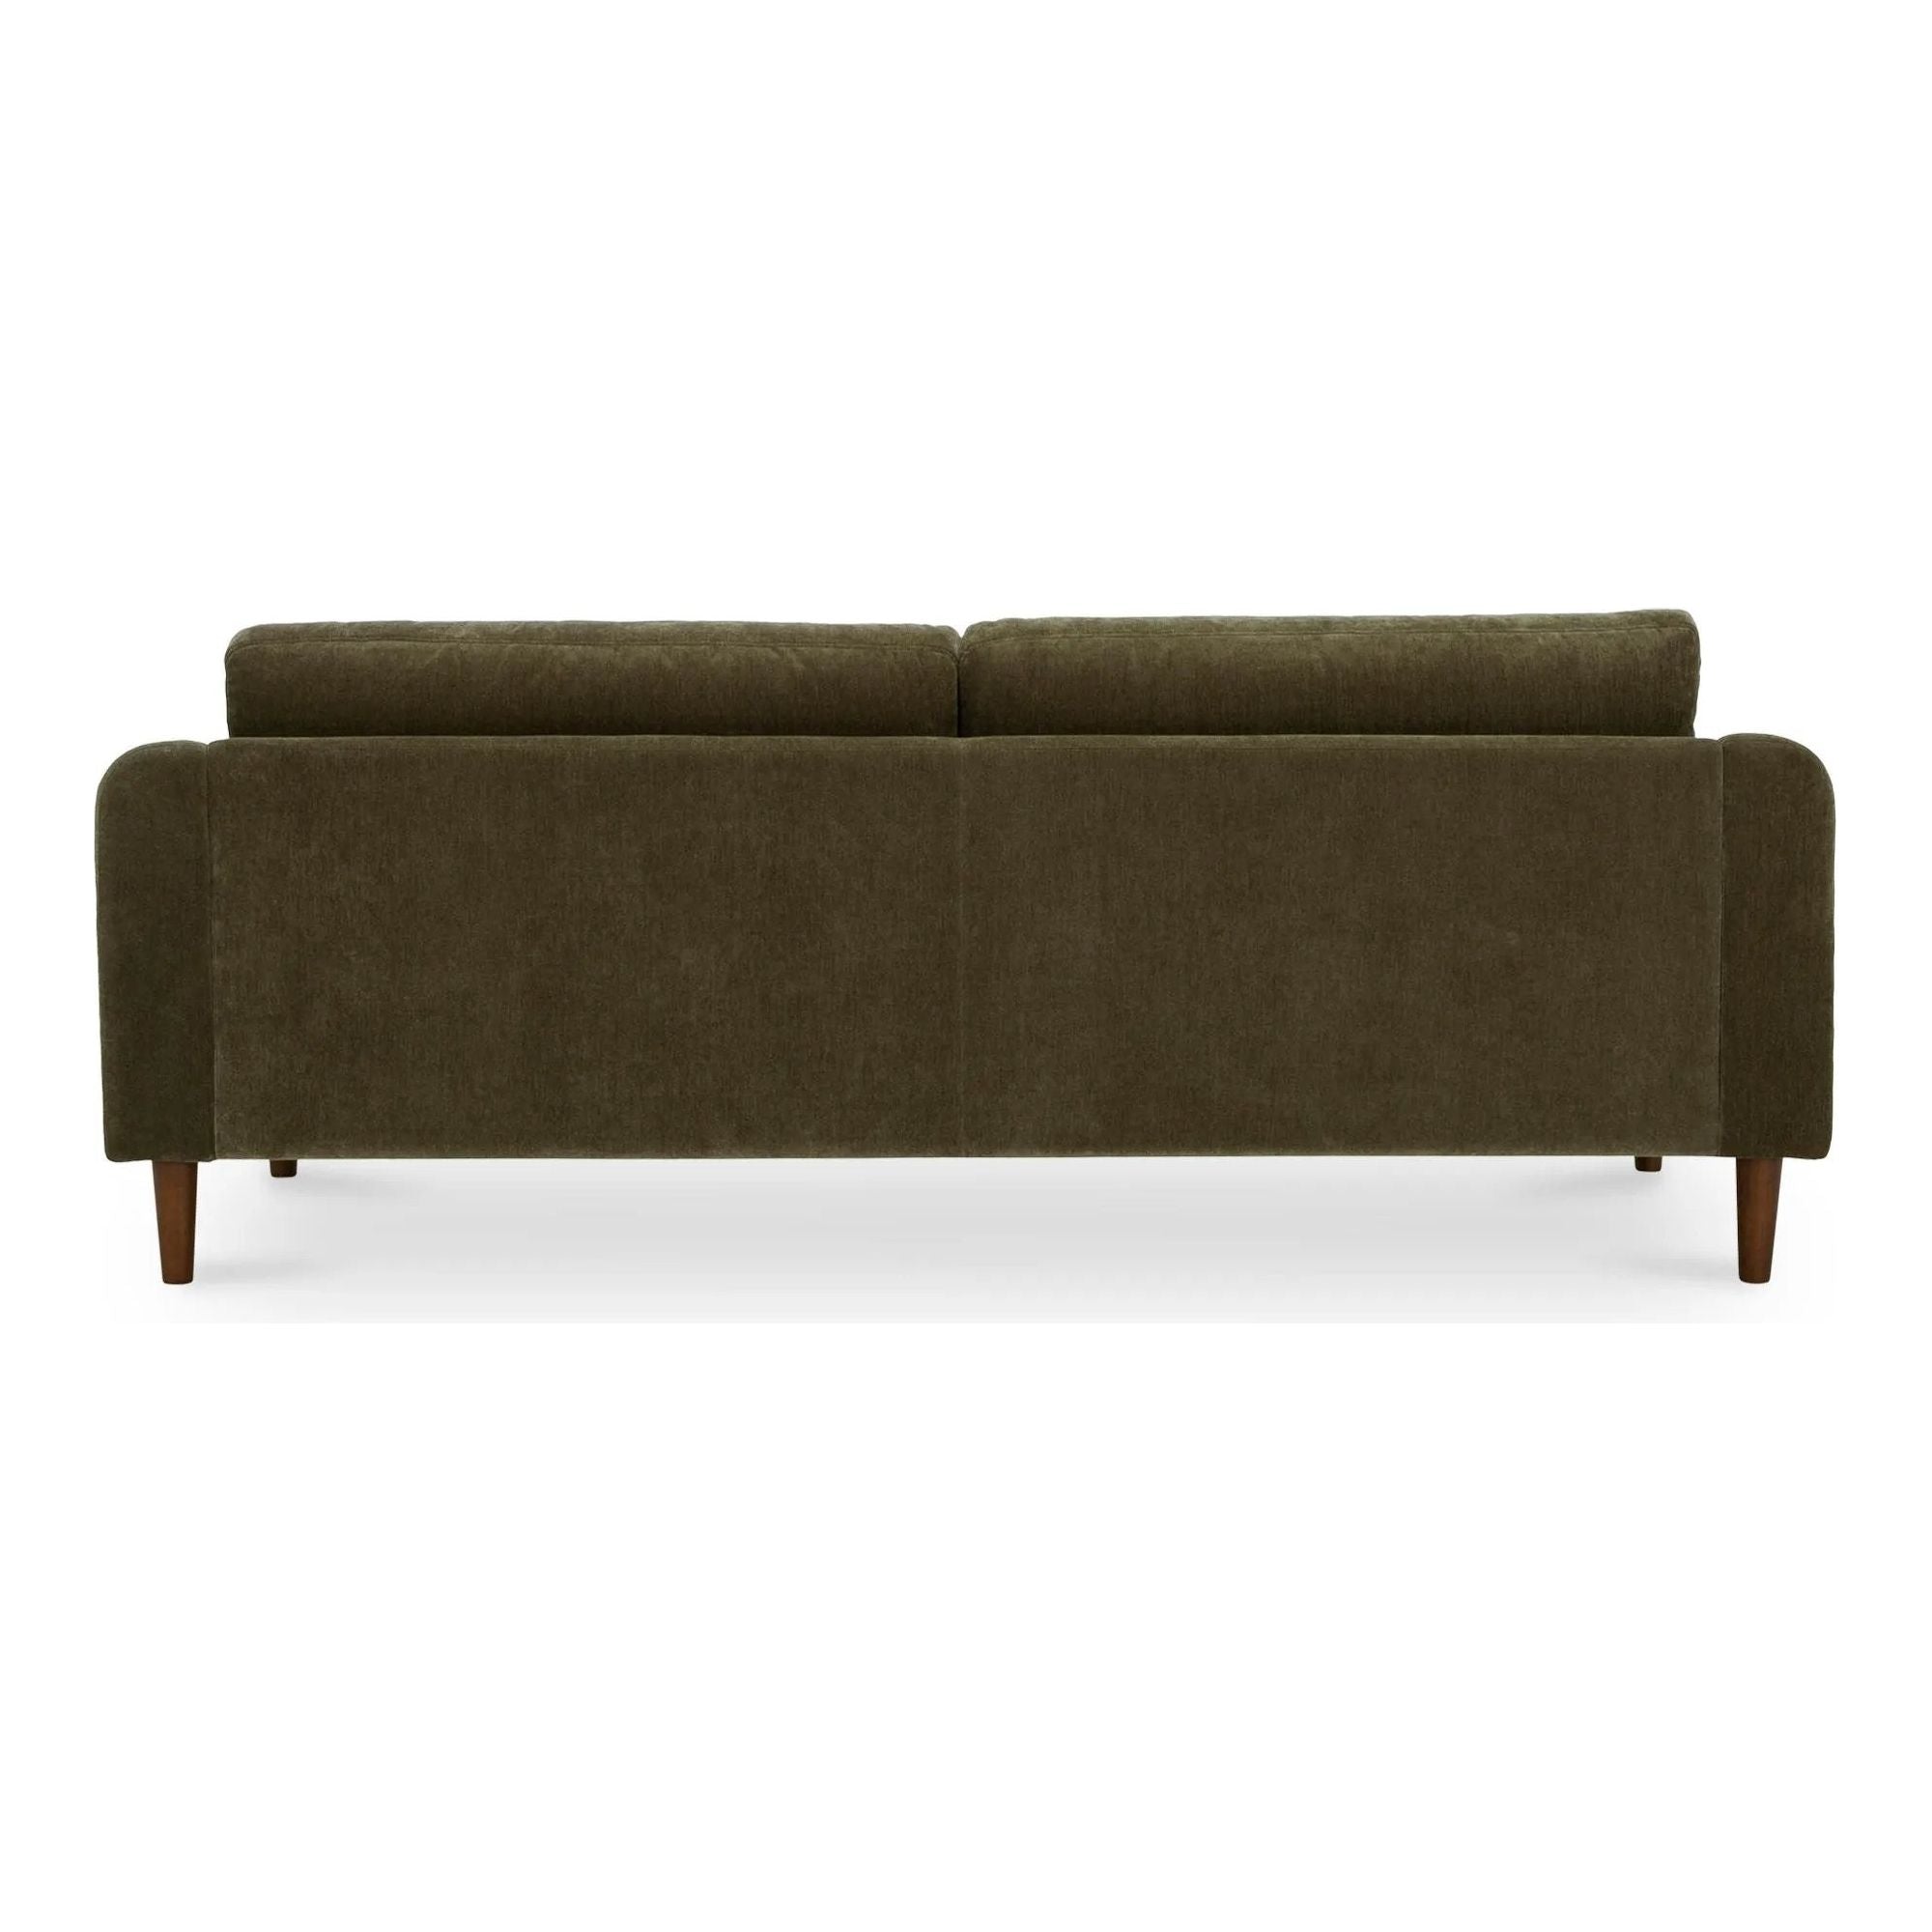 The Quinn sofa’s classic, transitional frame is designed for versatility, harmoniously fitting into a variety of spaces. It stands on a foundation of durability and sustainable charm with a wood frame and legs. Amethyst Home provides interior design, new home construction design consulting, vintage area rugs, and lighting in the Seattle metro area.